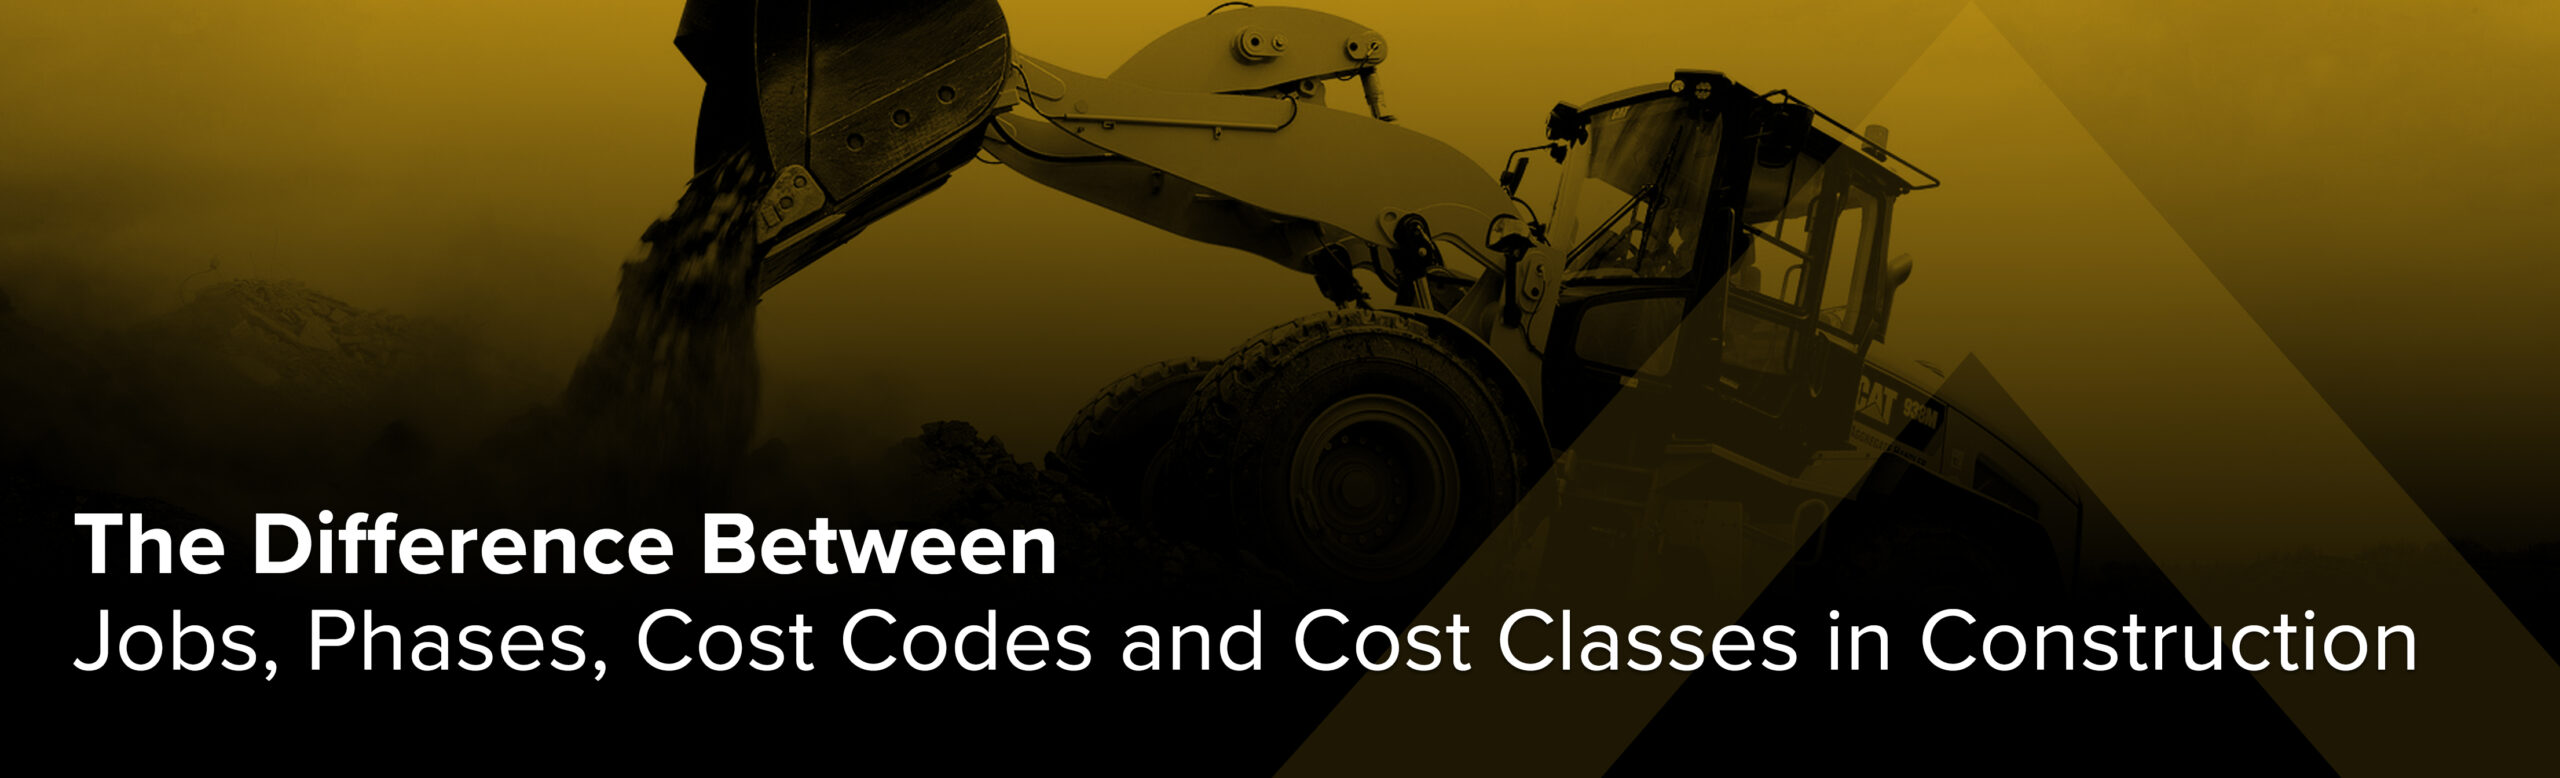 The Difference Between Jobs, Phases, Cost Codes and Cost Classes in Construction